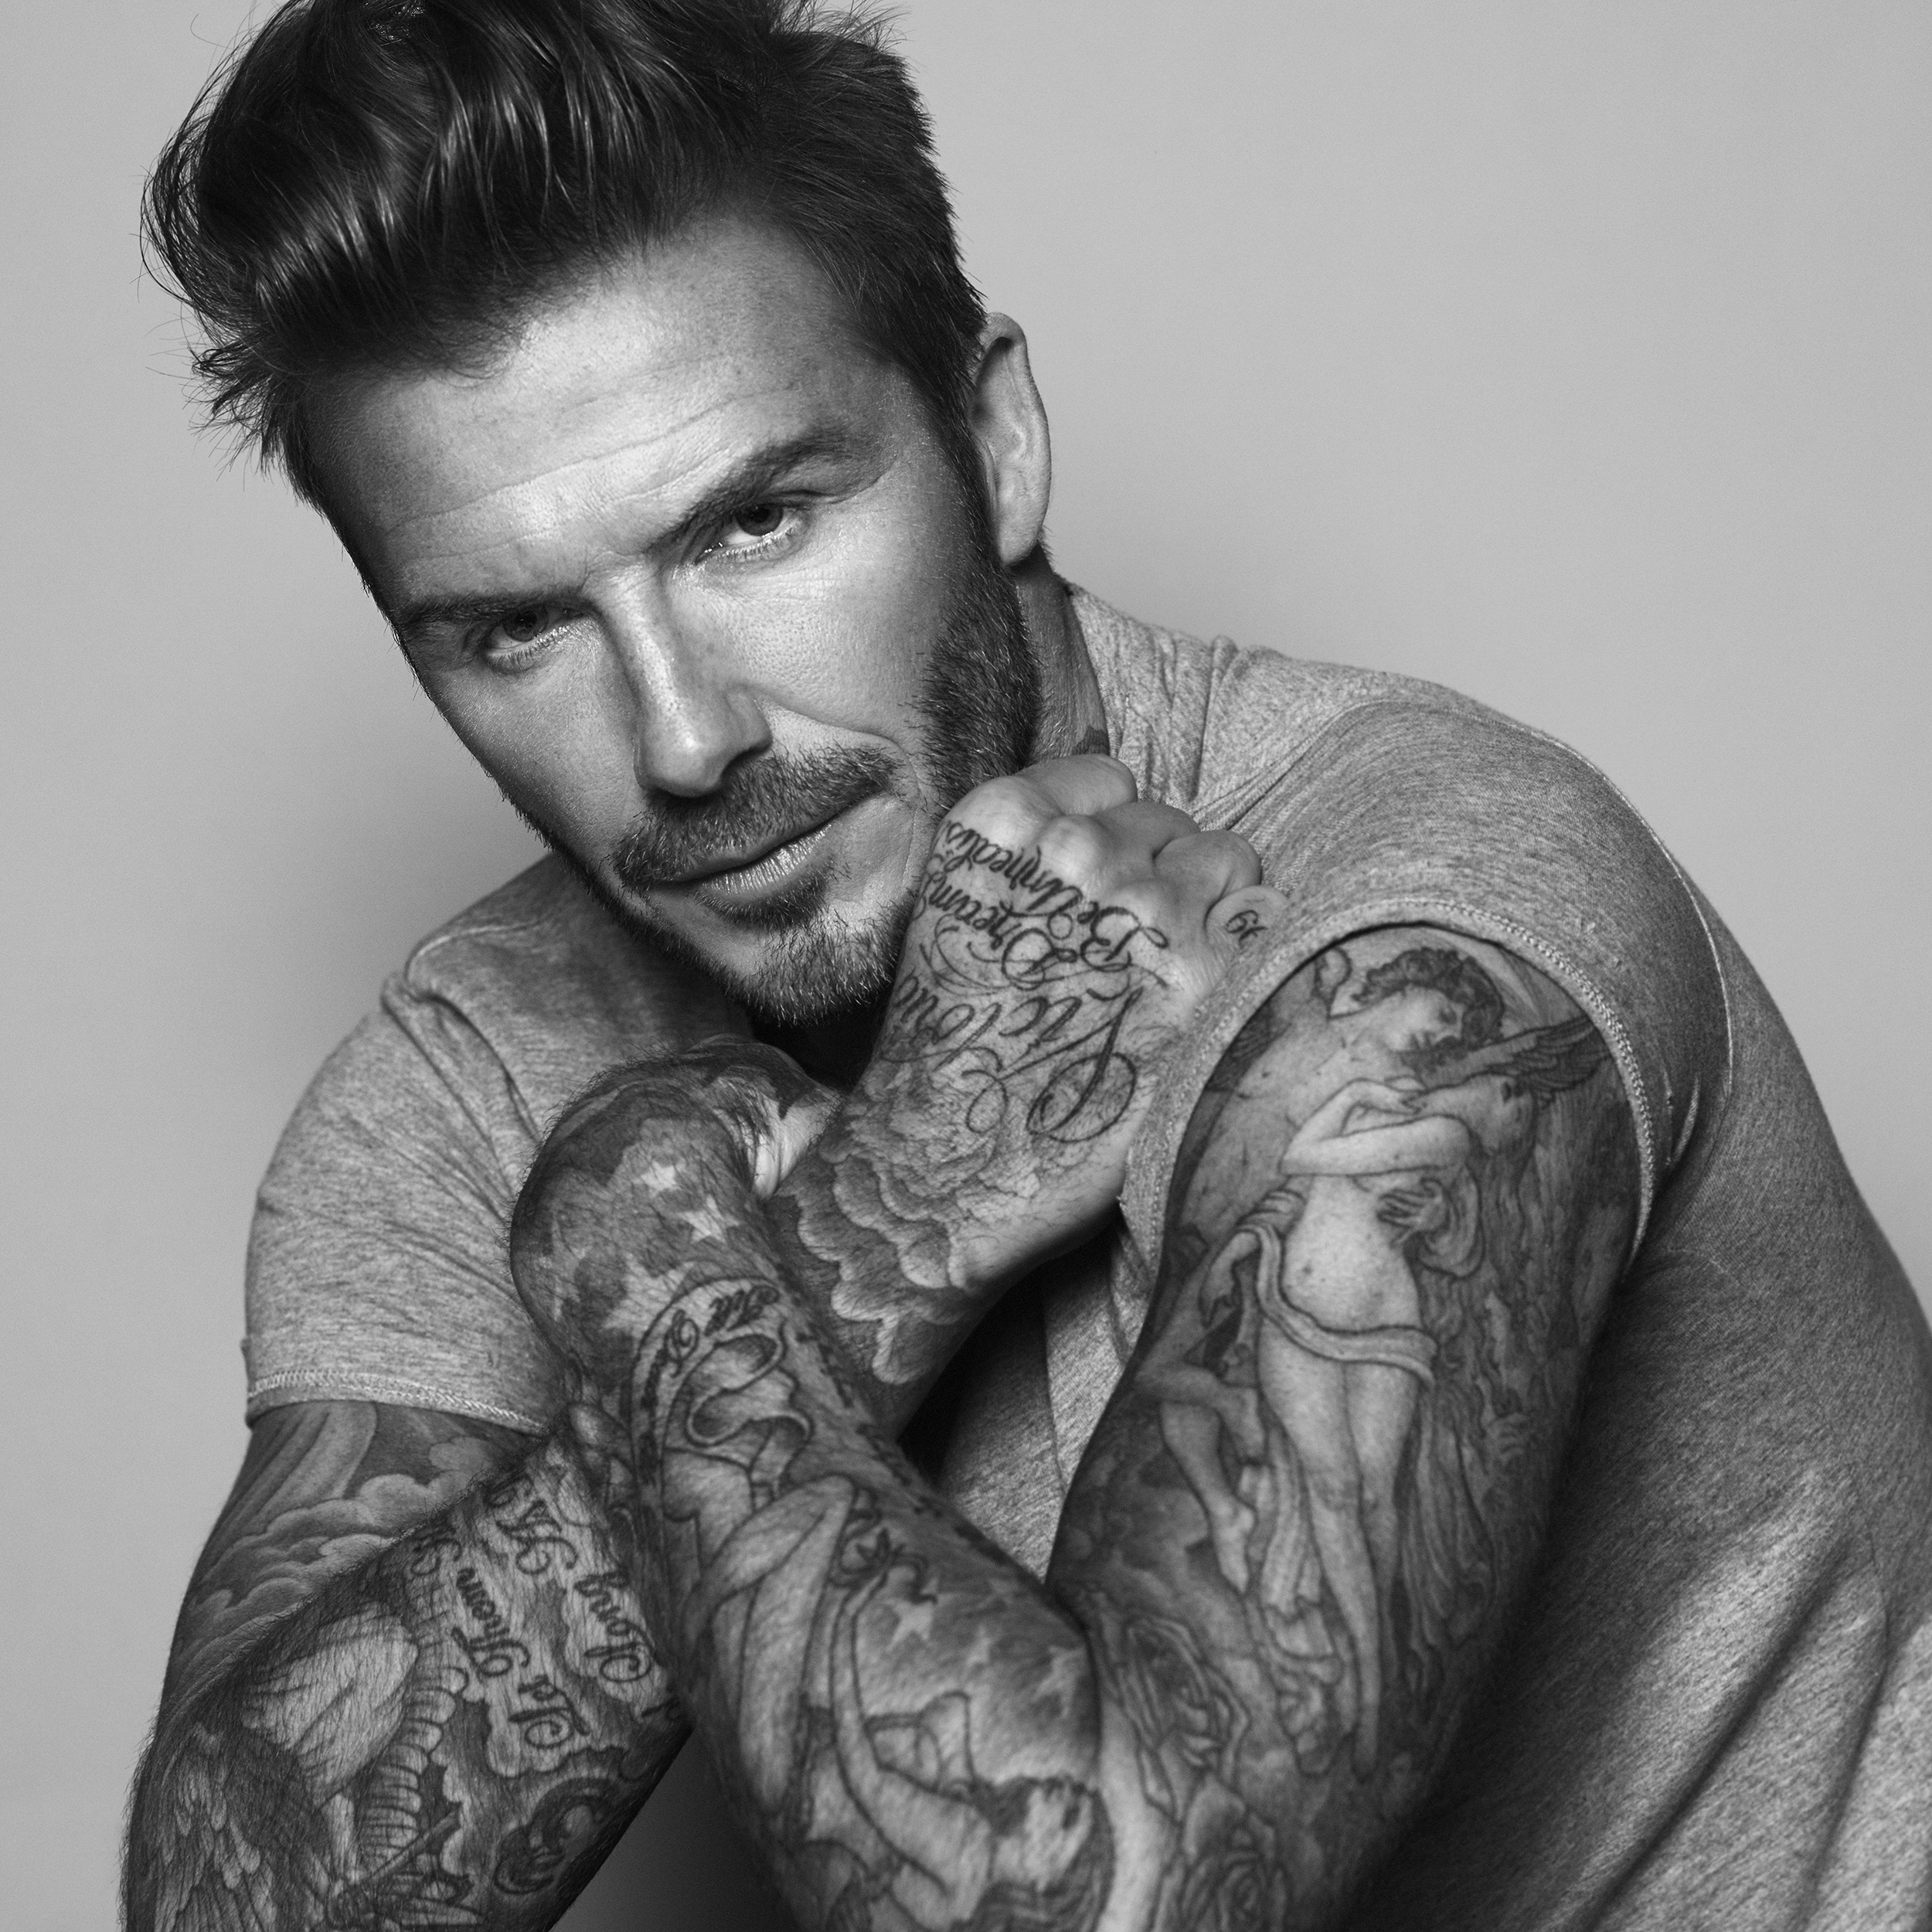 David Beckham to Develop Men’s Grooming Products: Details